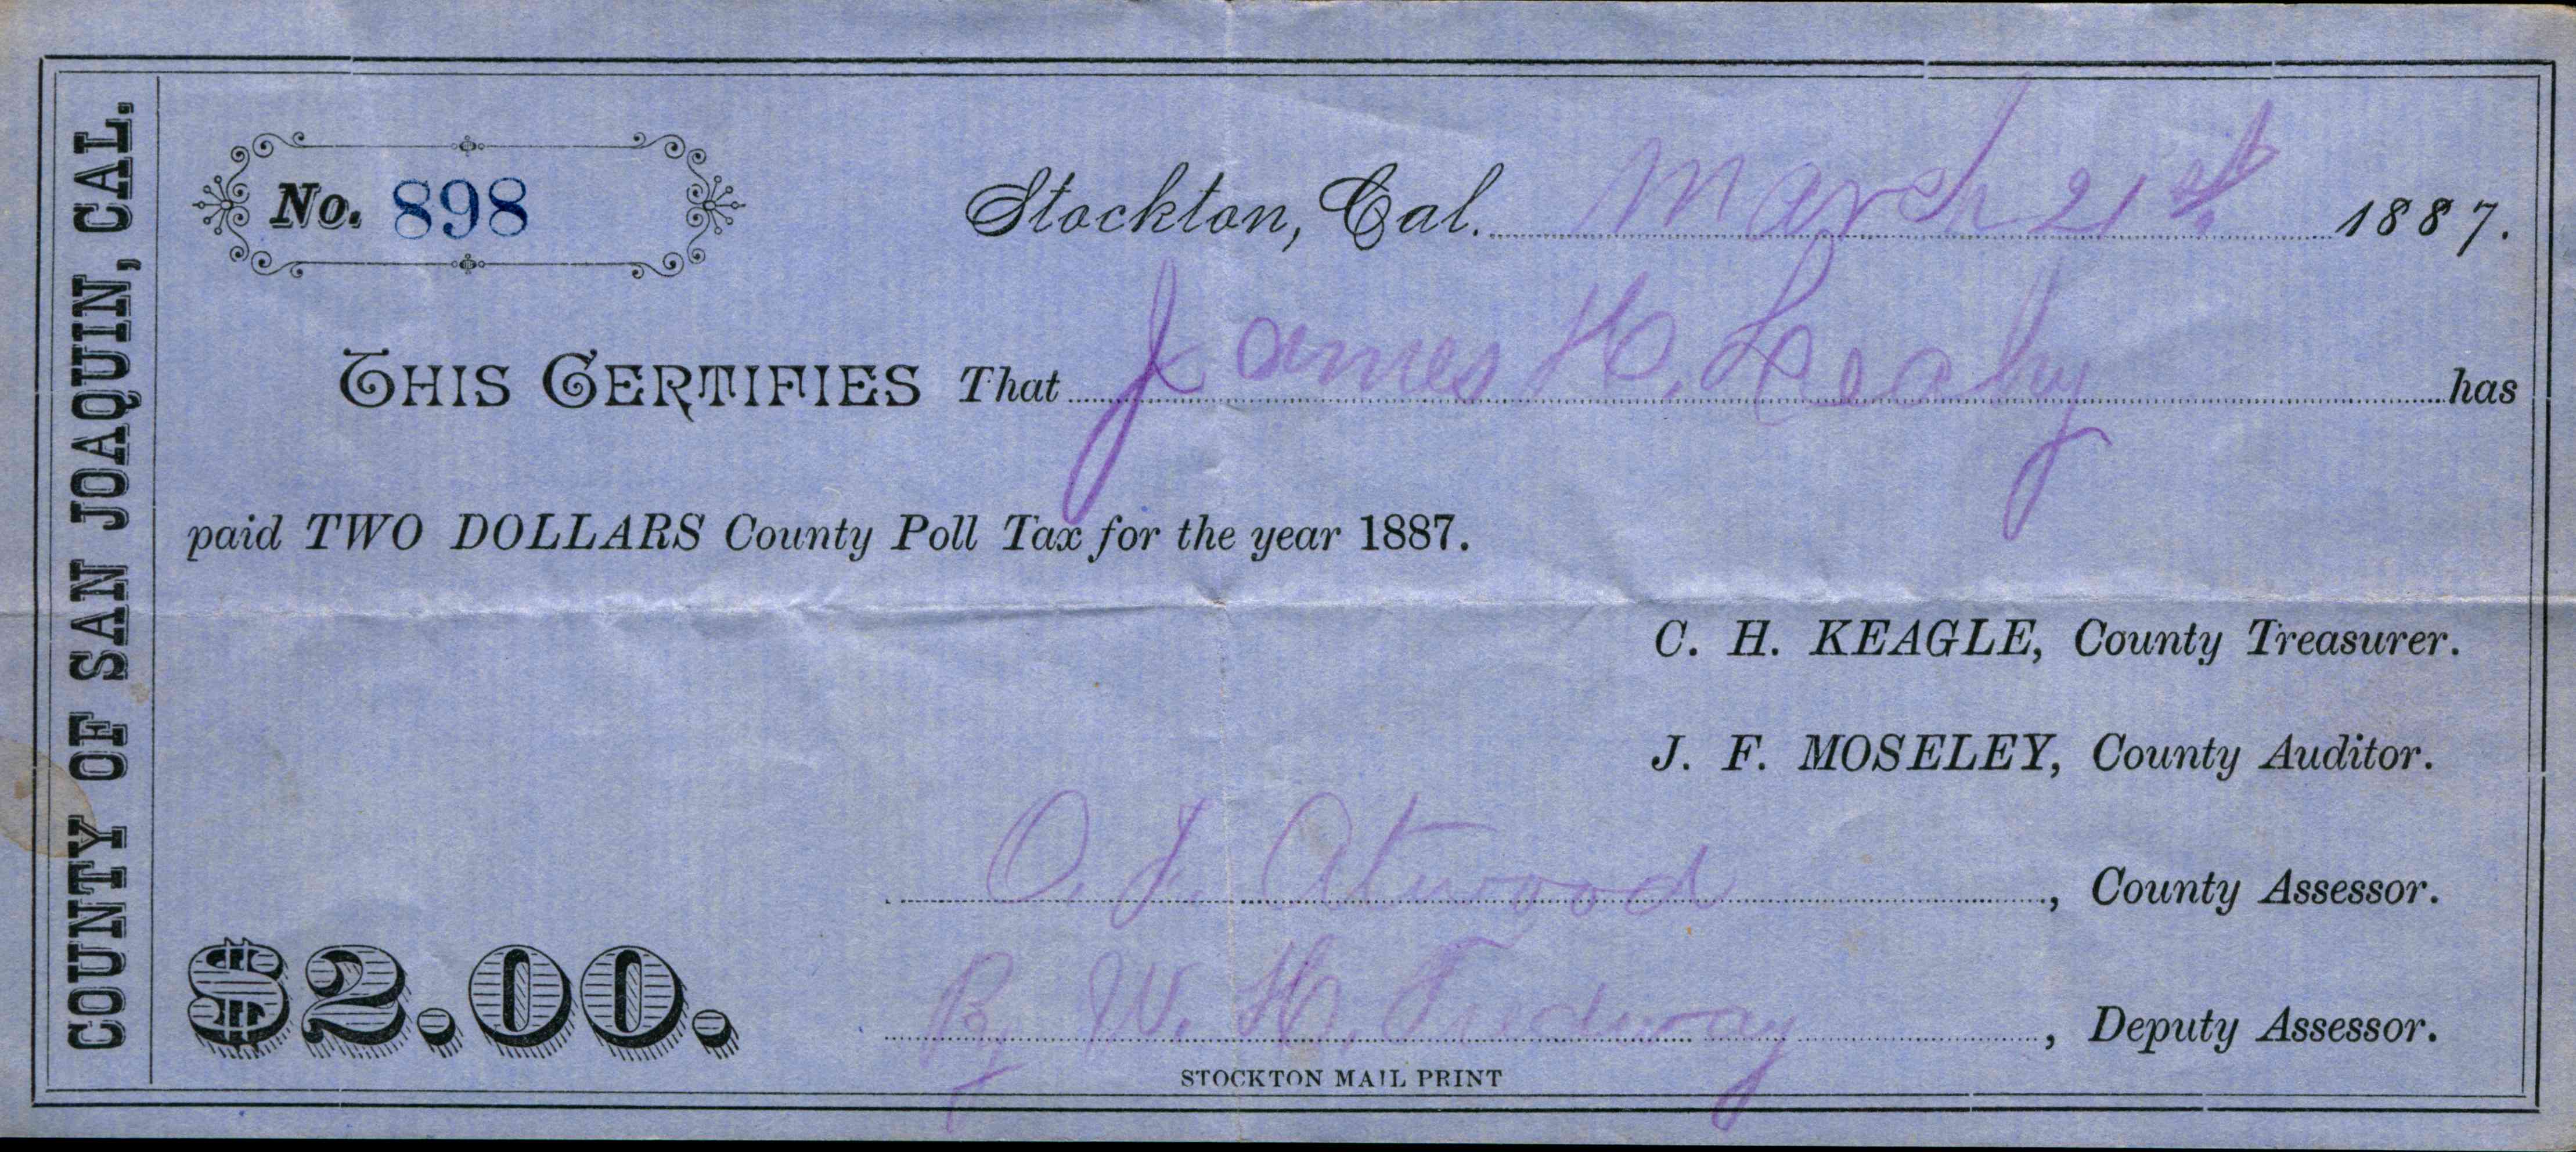 Receipt for $2.00 of poll tax